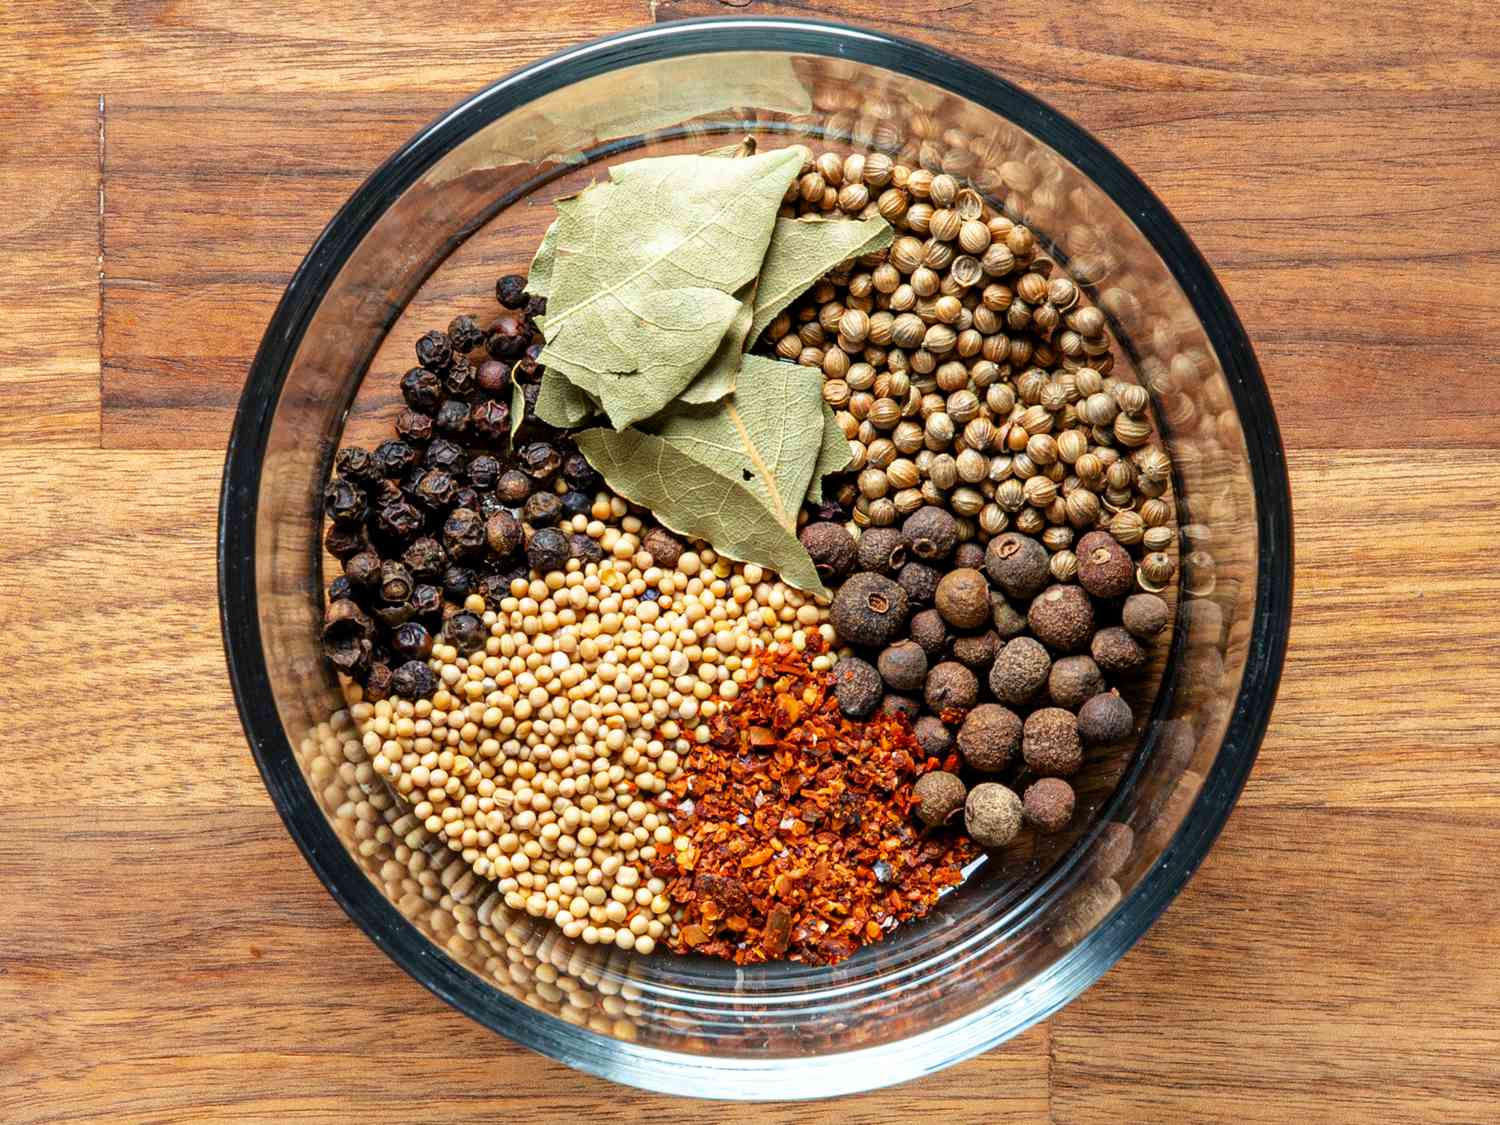 A look at the pickling spices in a bowl